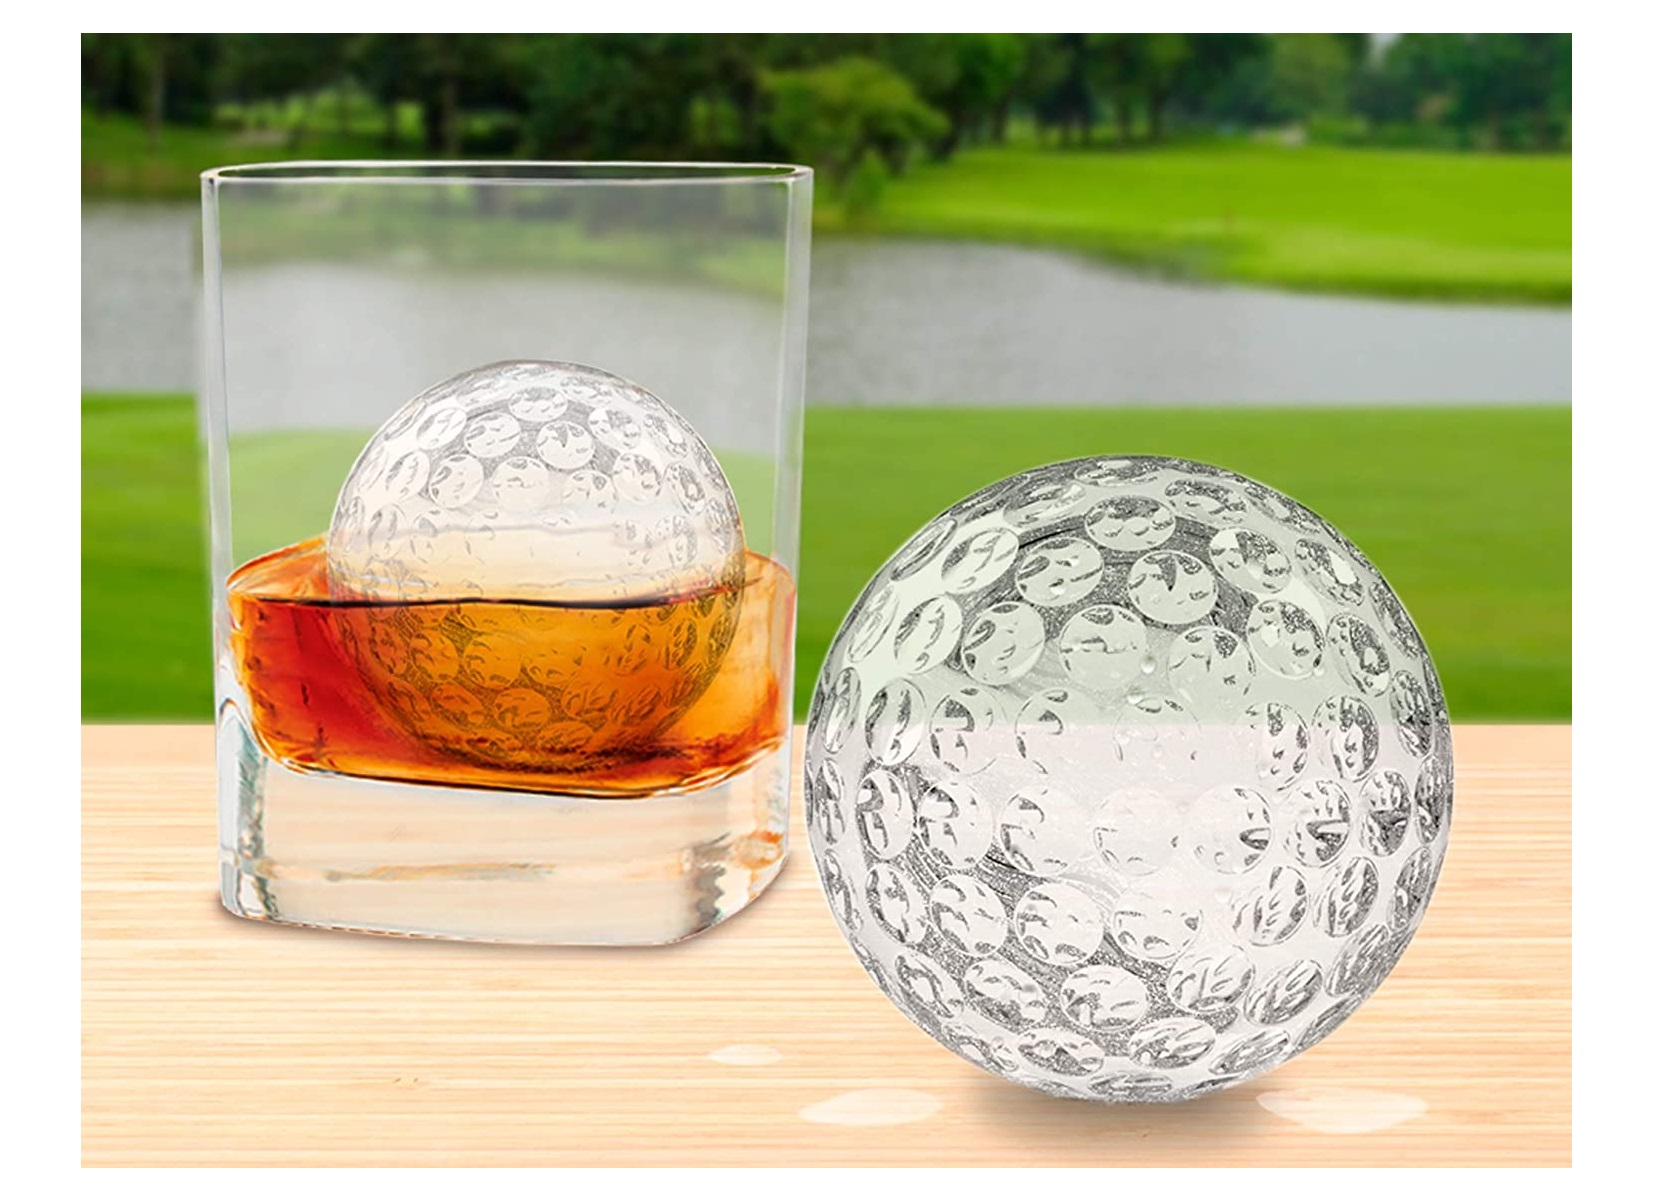 Golf Ball Ice Cube Molds - The Aggressive Fade